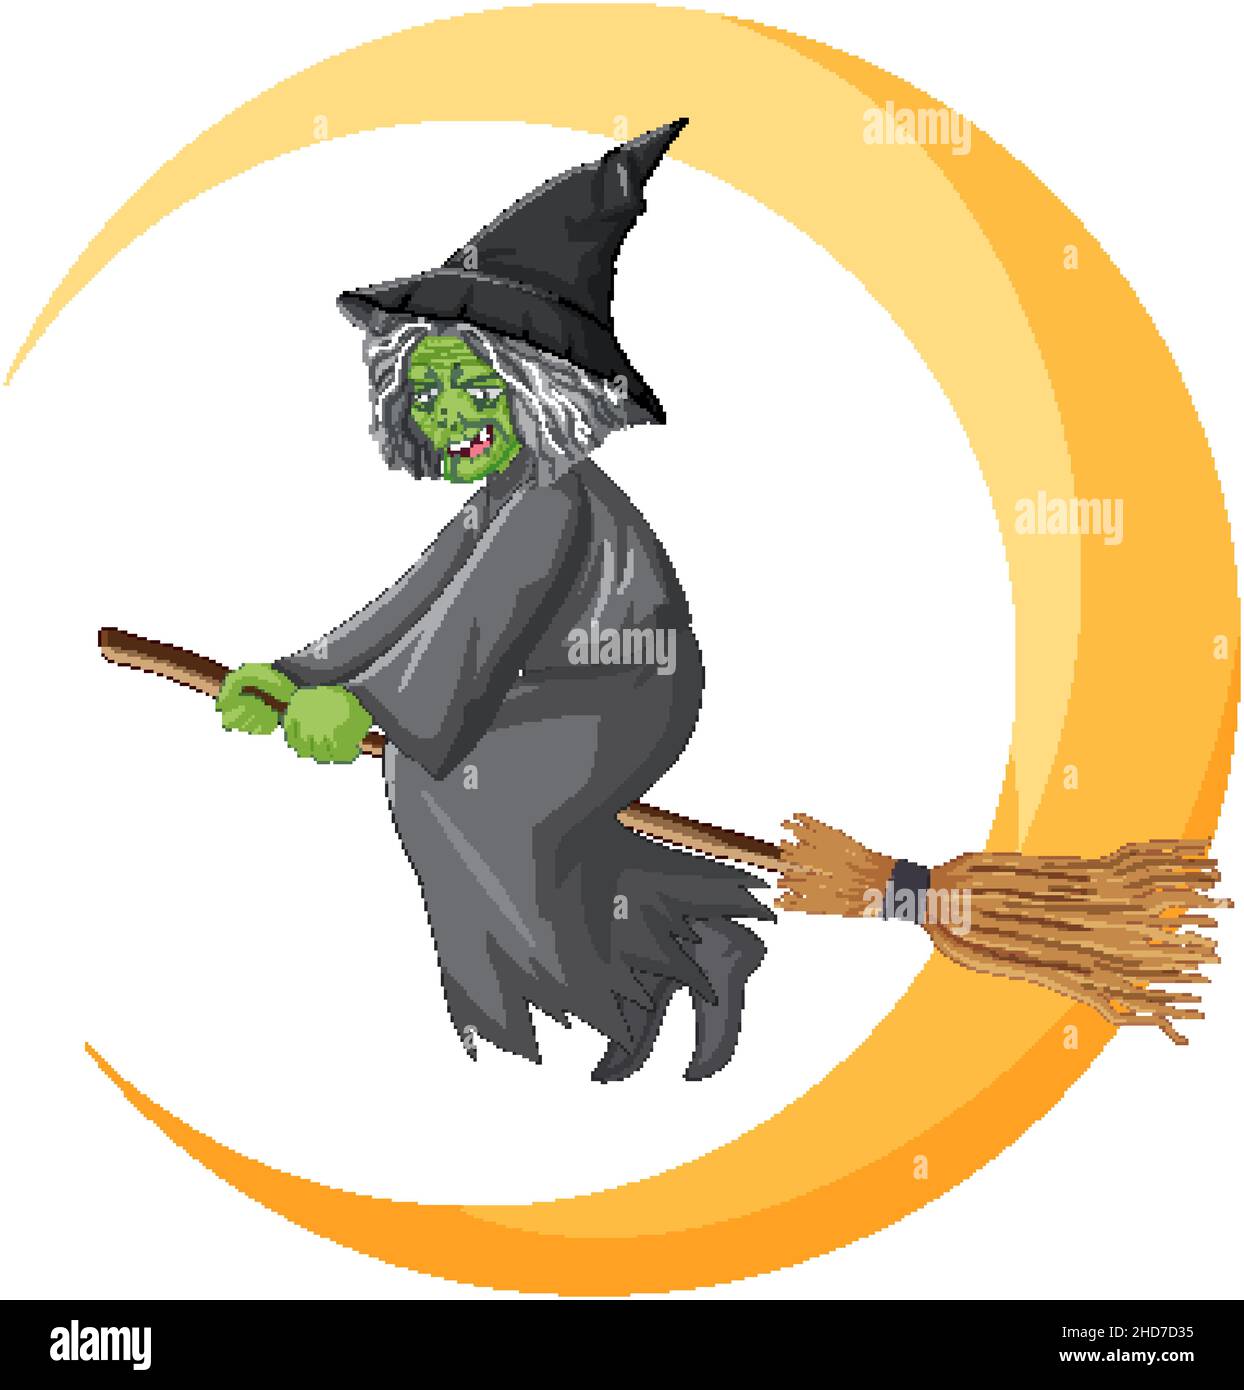 Old witch riding broomstick with crescent moon illustration Stock Vector